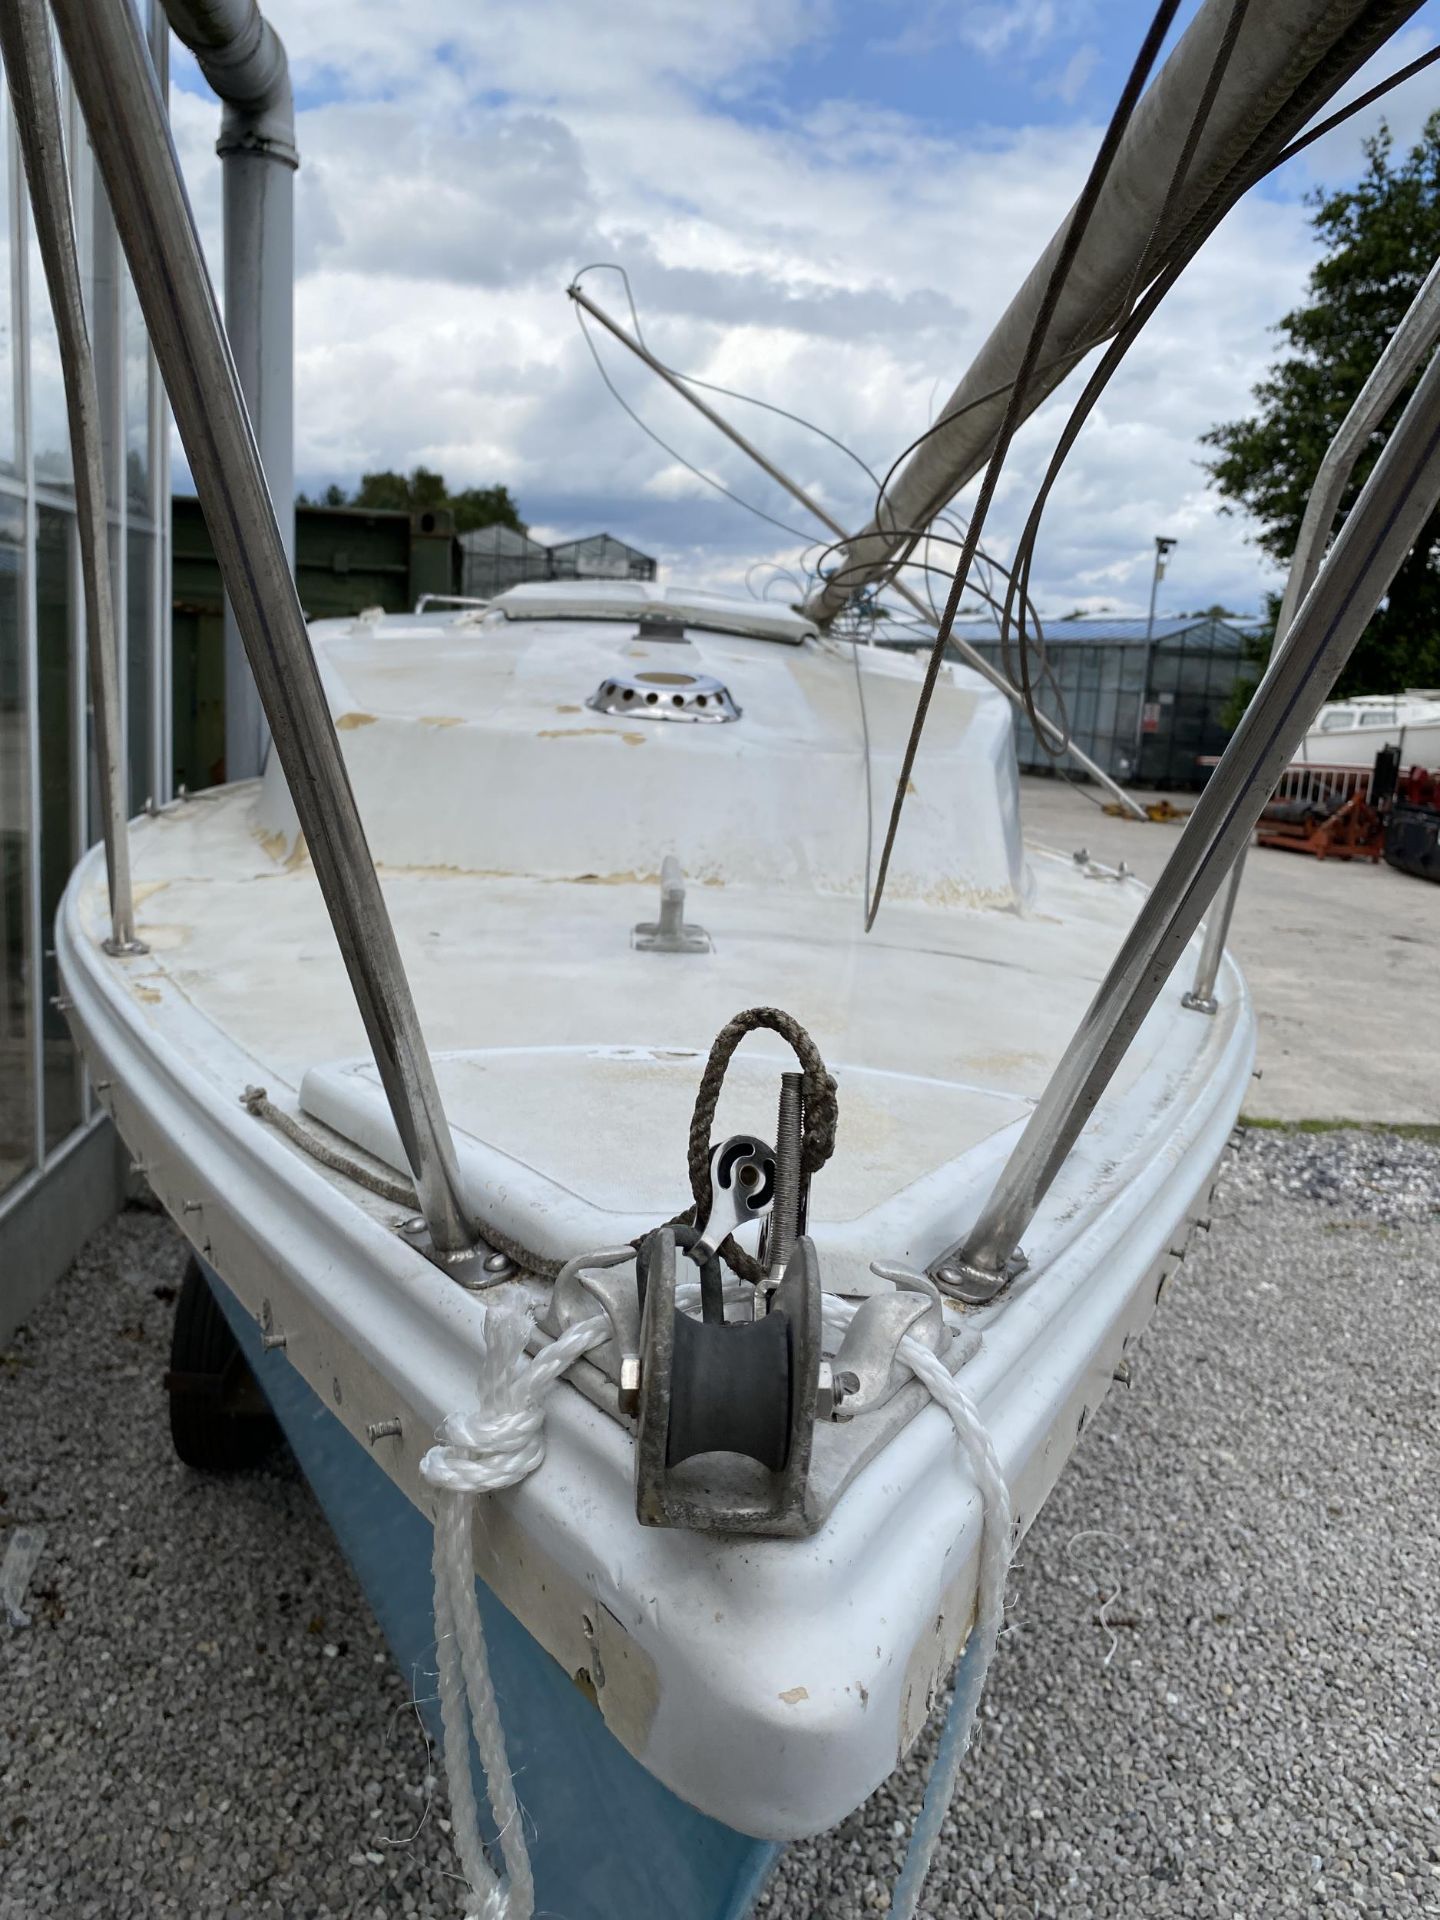 A FOXCUB 18 TWIN KEEL SAILBOAT WITH LAUNCHING TRAILER (NOT ROAD WORTHY) DRY STORED FOR THE LAST 8 - Image 13 of 13